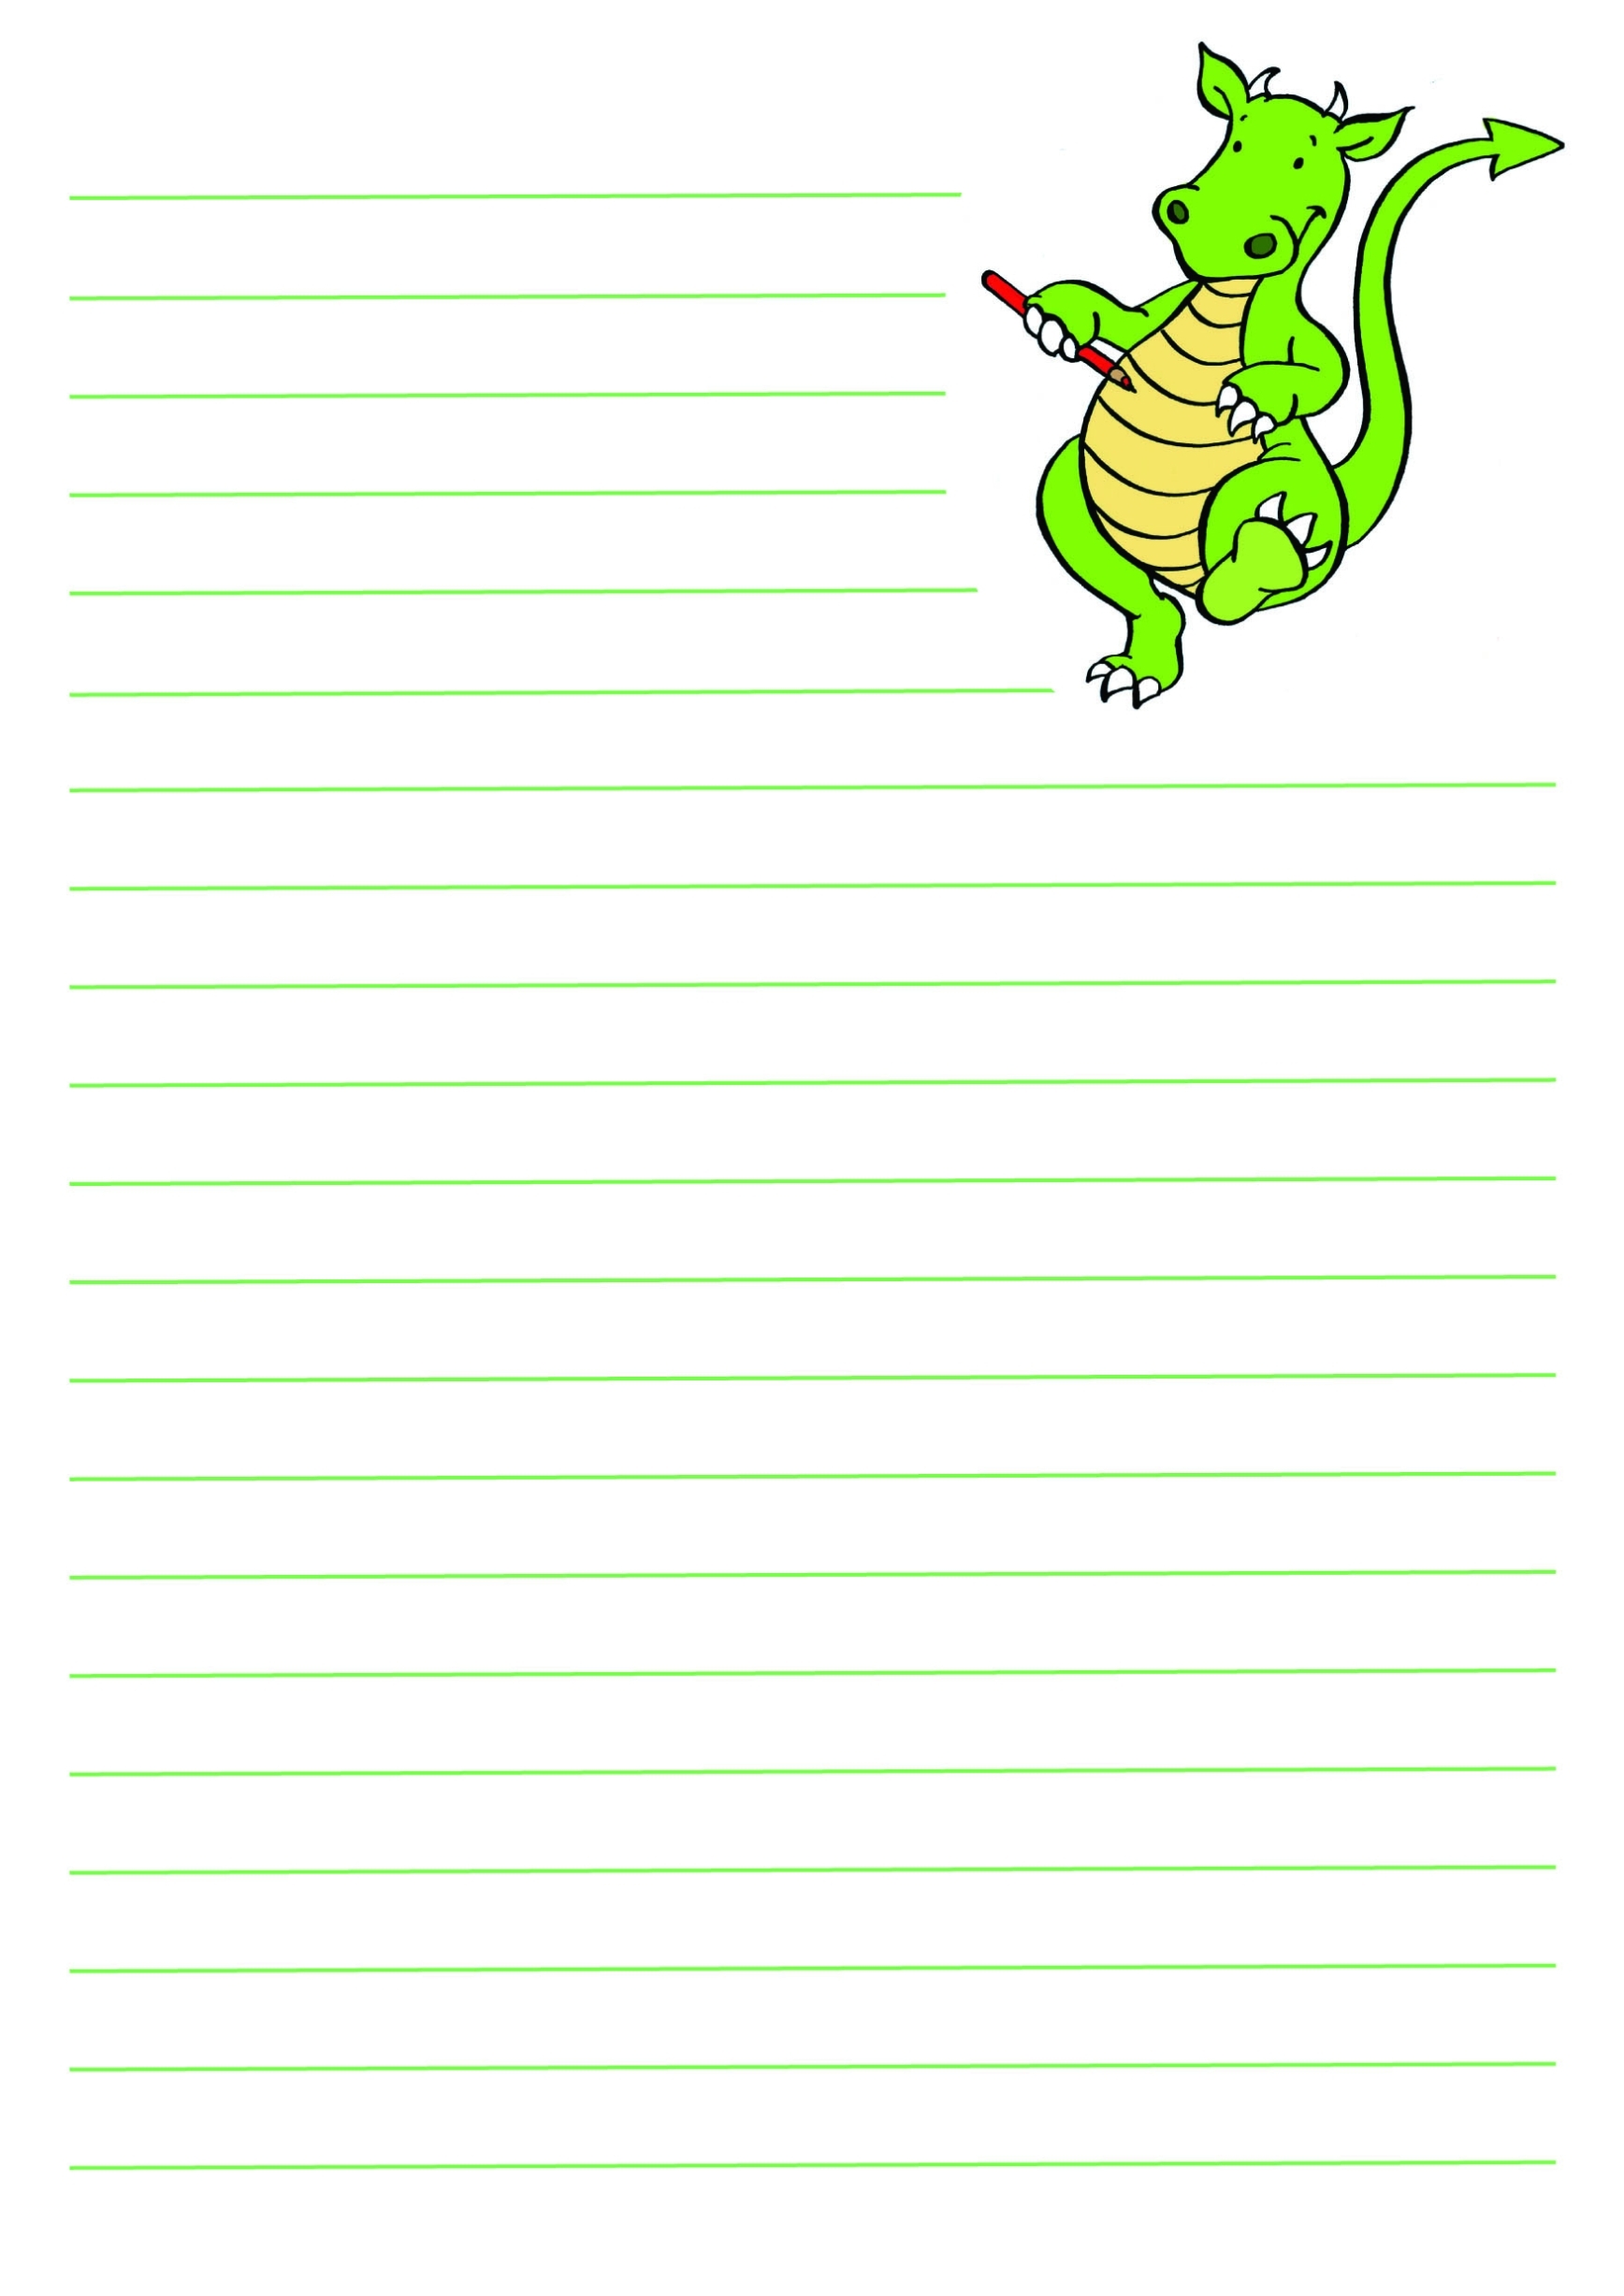 Letter Template For Boys. Download Our Free Dragon Template. For Letter Writing Template For Kids